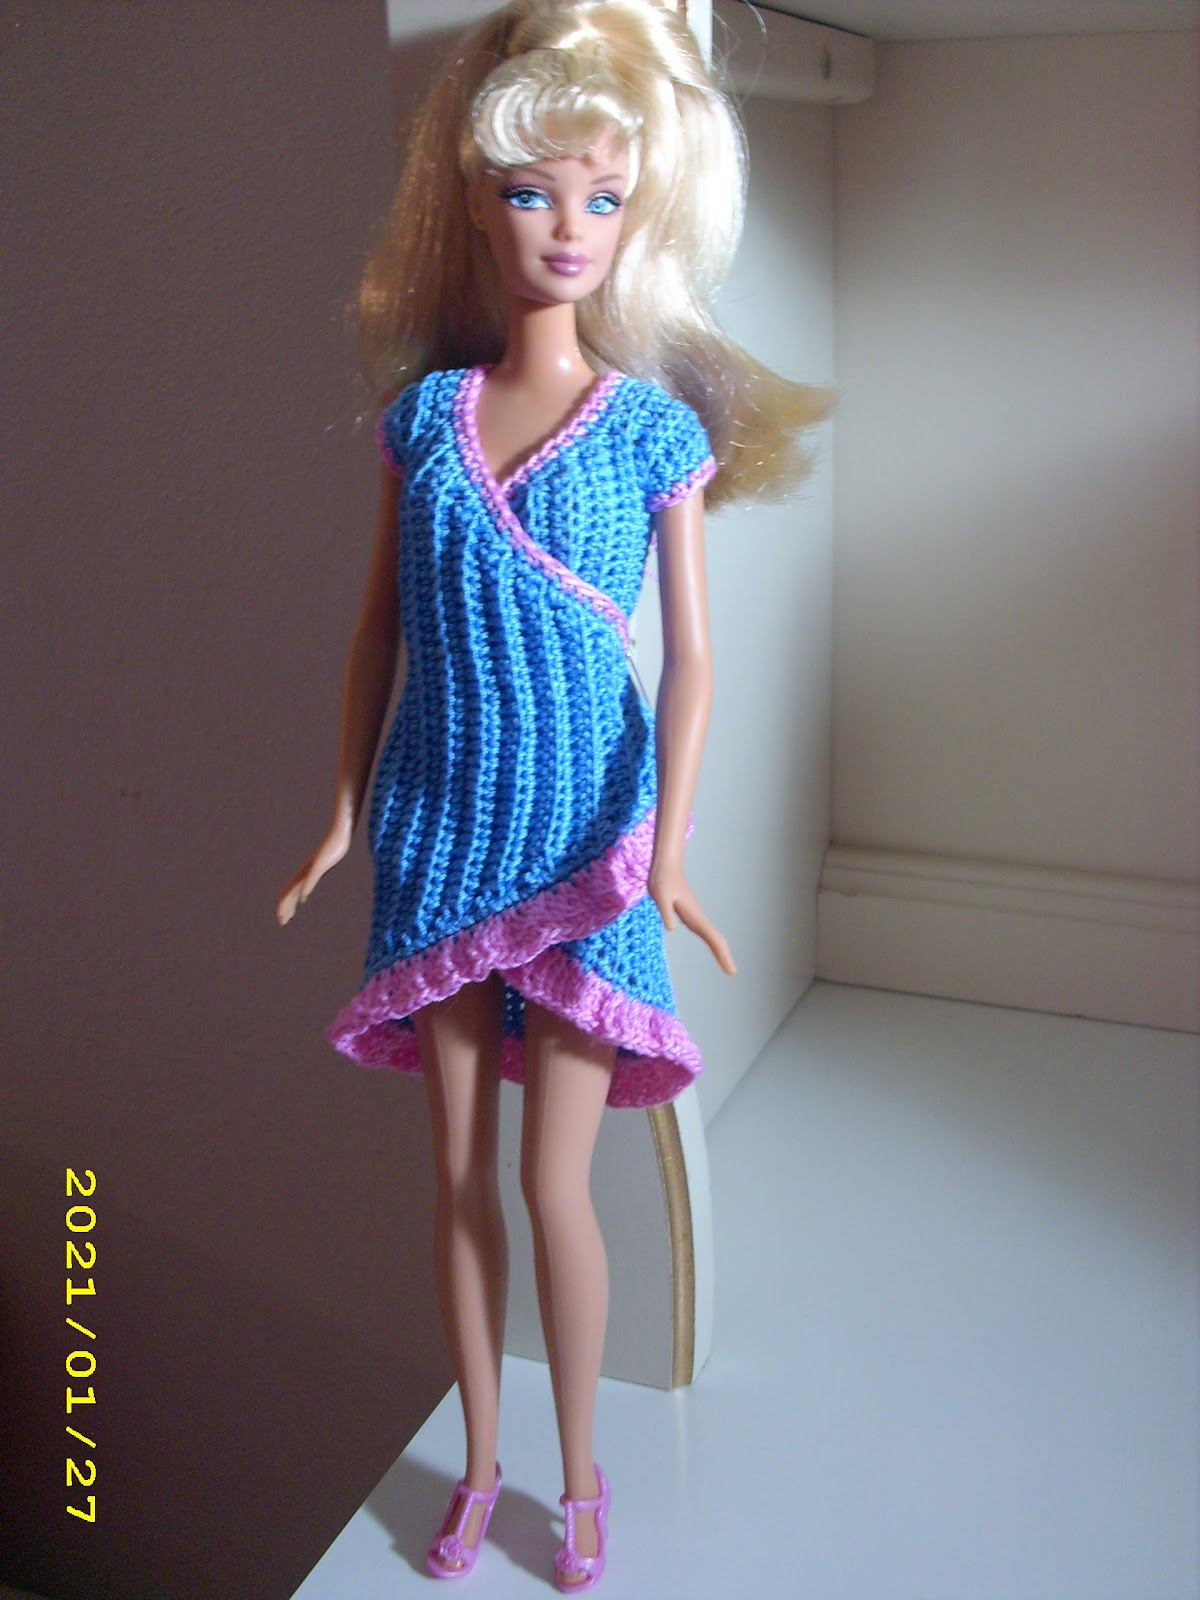 Crochet Doll Dress Patterns For Barbies Crochet For Barbie The Belly Button Body Type Electric Blue Wrap